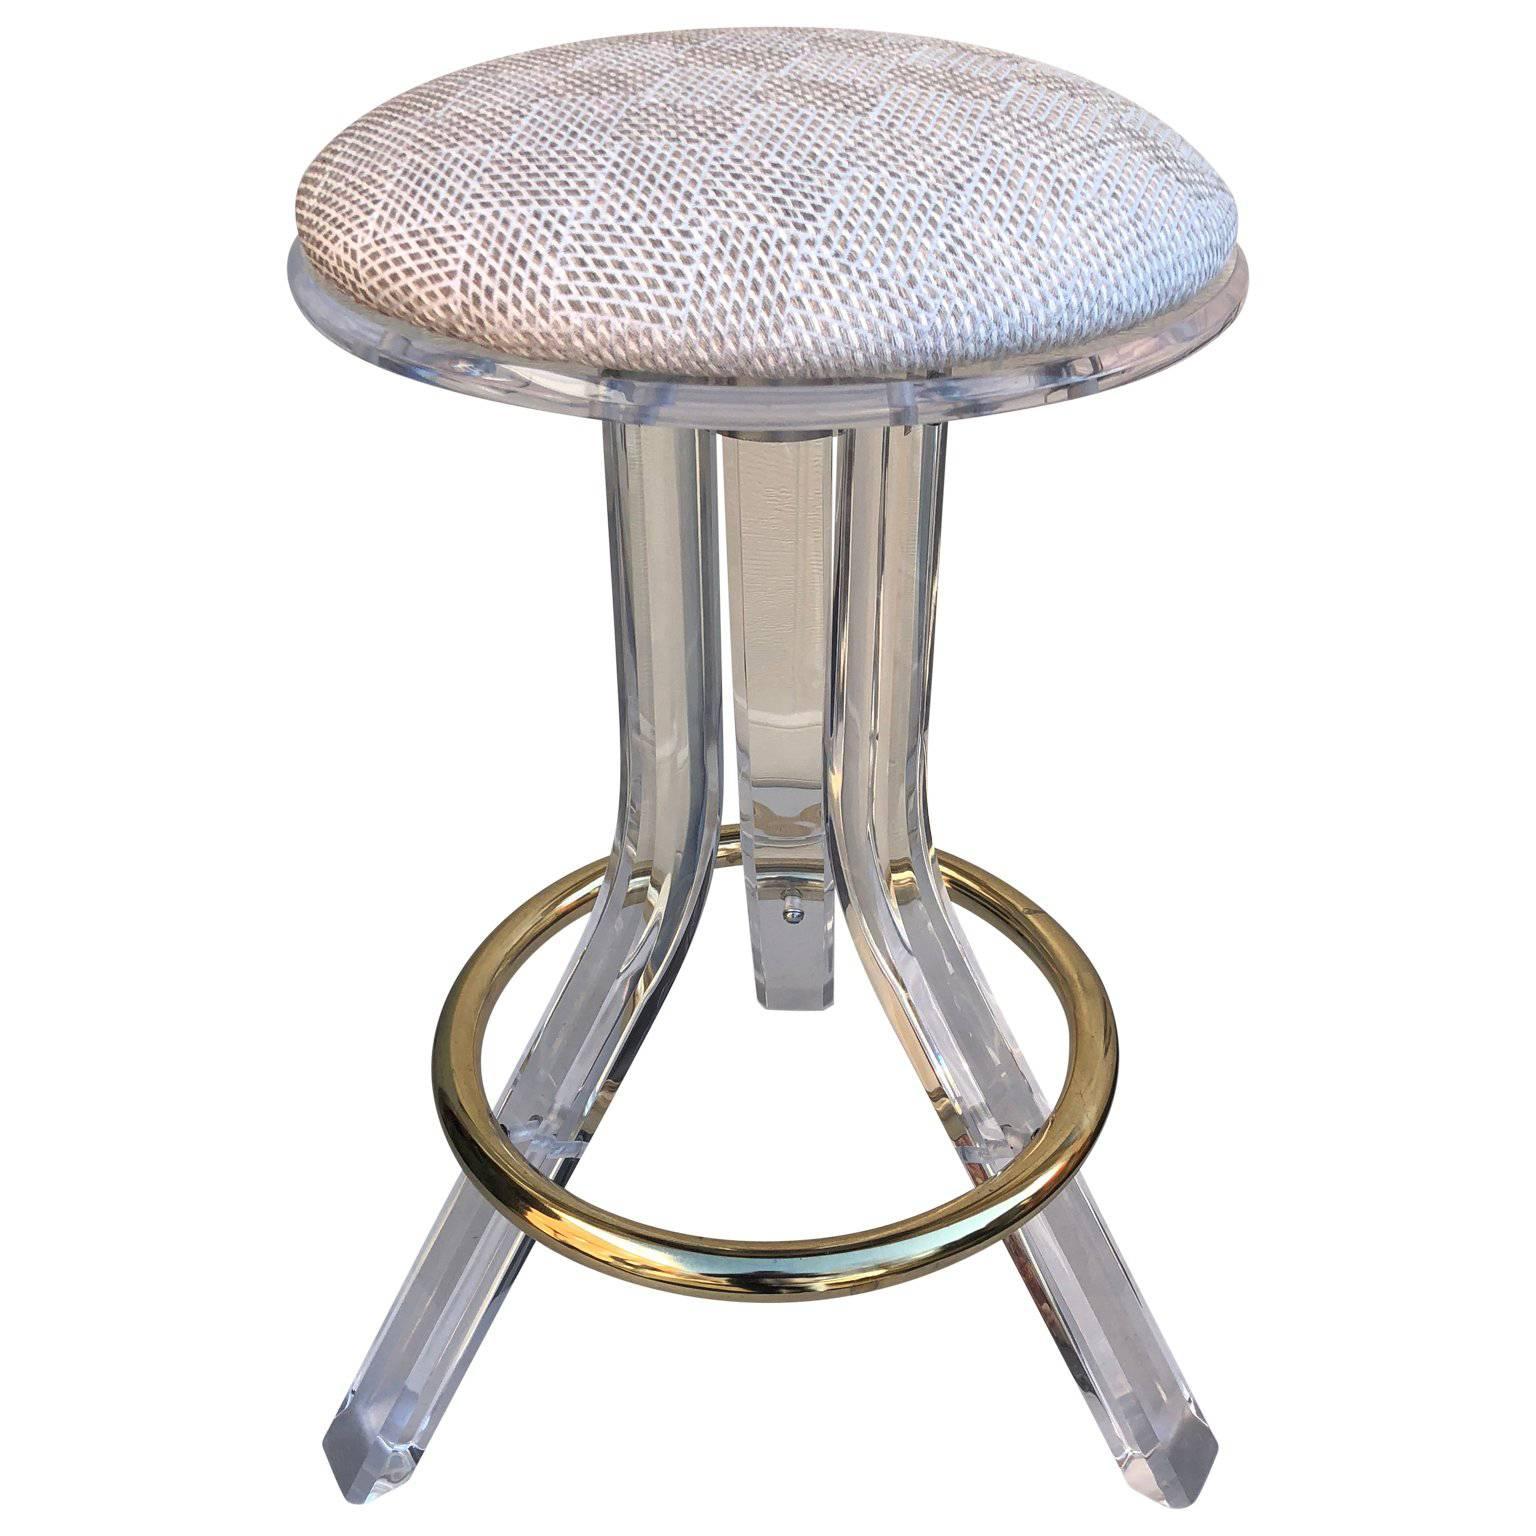 Single 1970s Lucite Vanity or Bar Stool with Brass Hardware